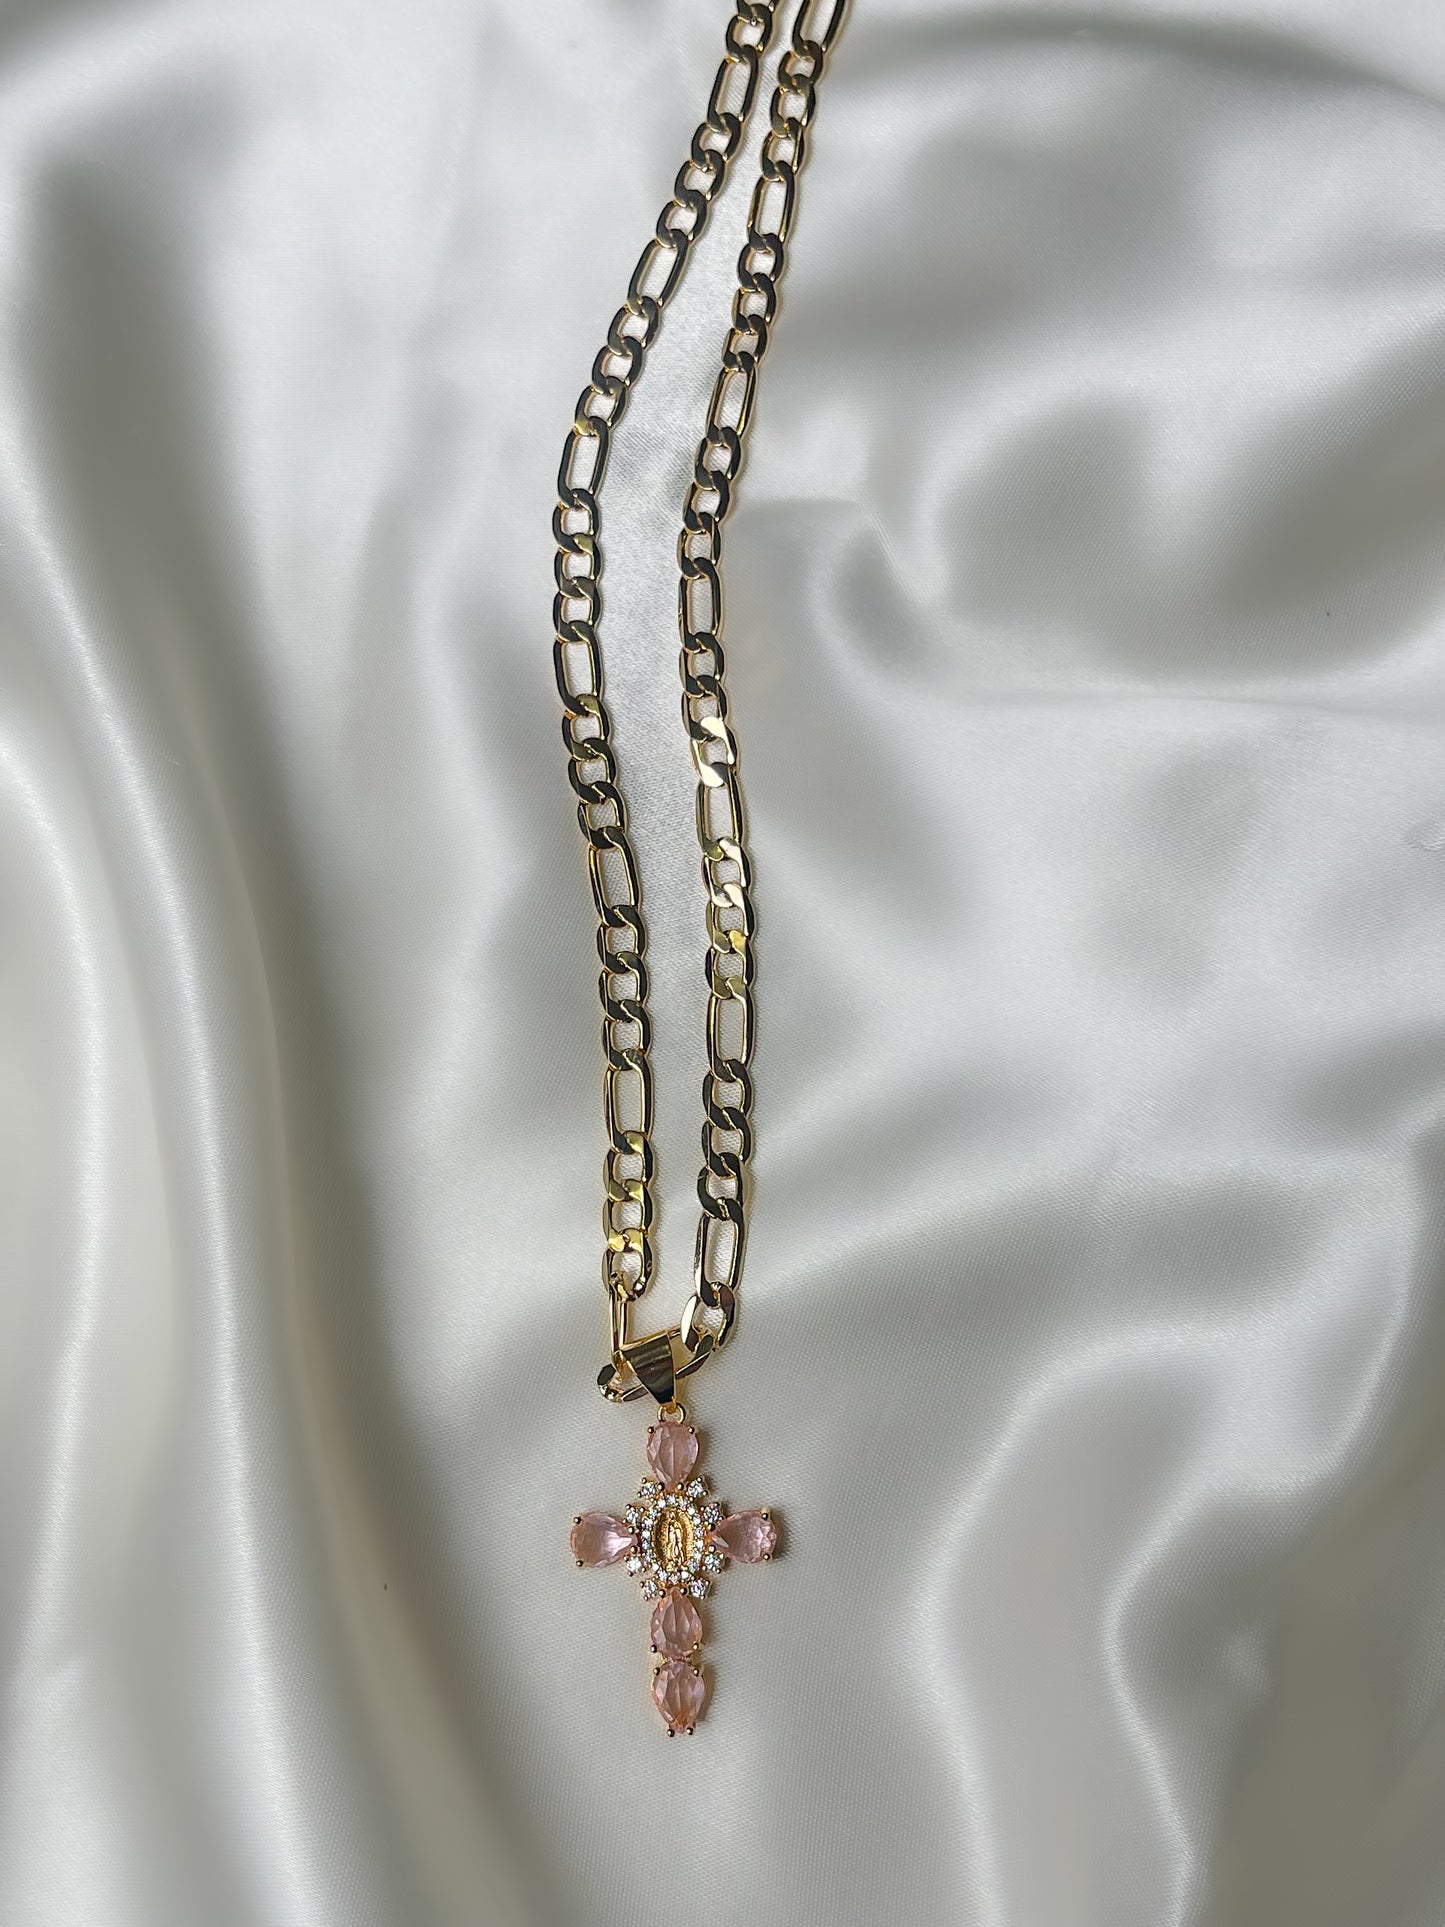 Gold and Pink Virgin Mary Cross Necklace